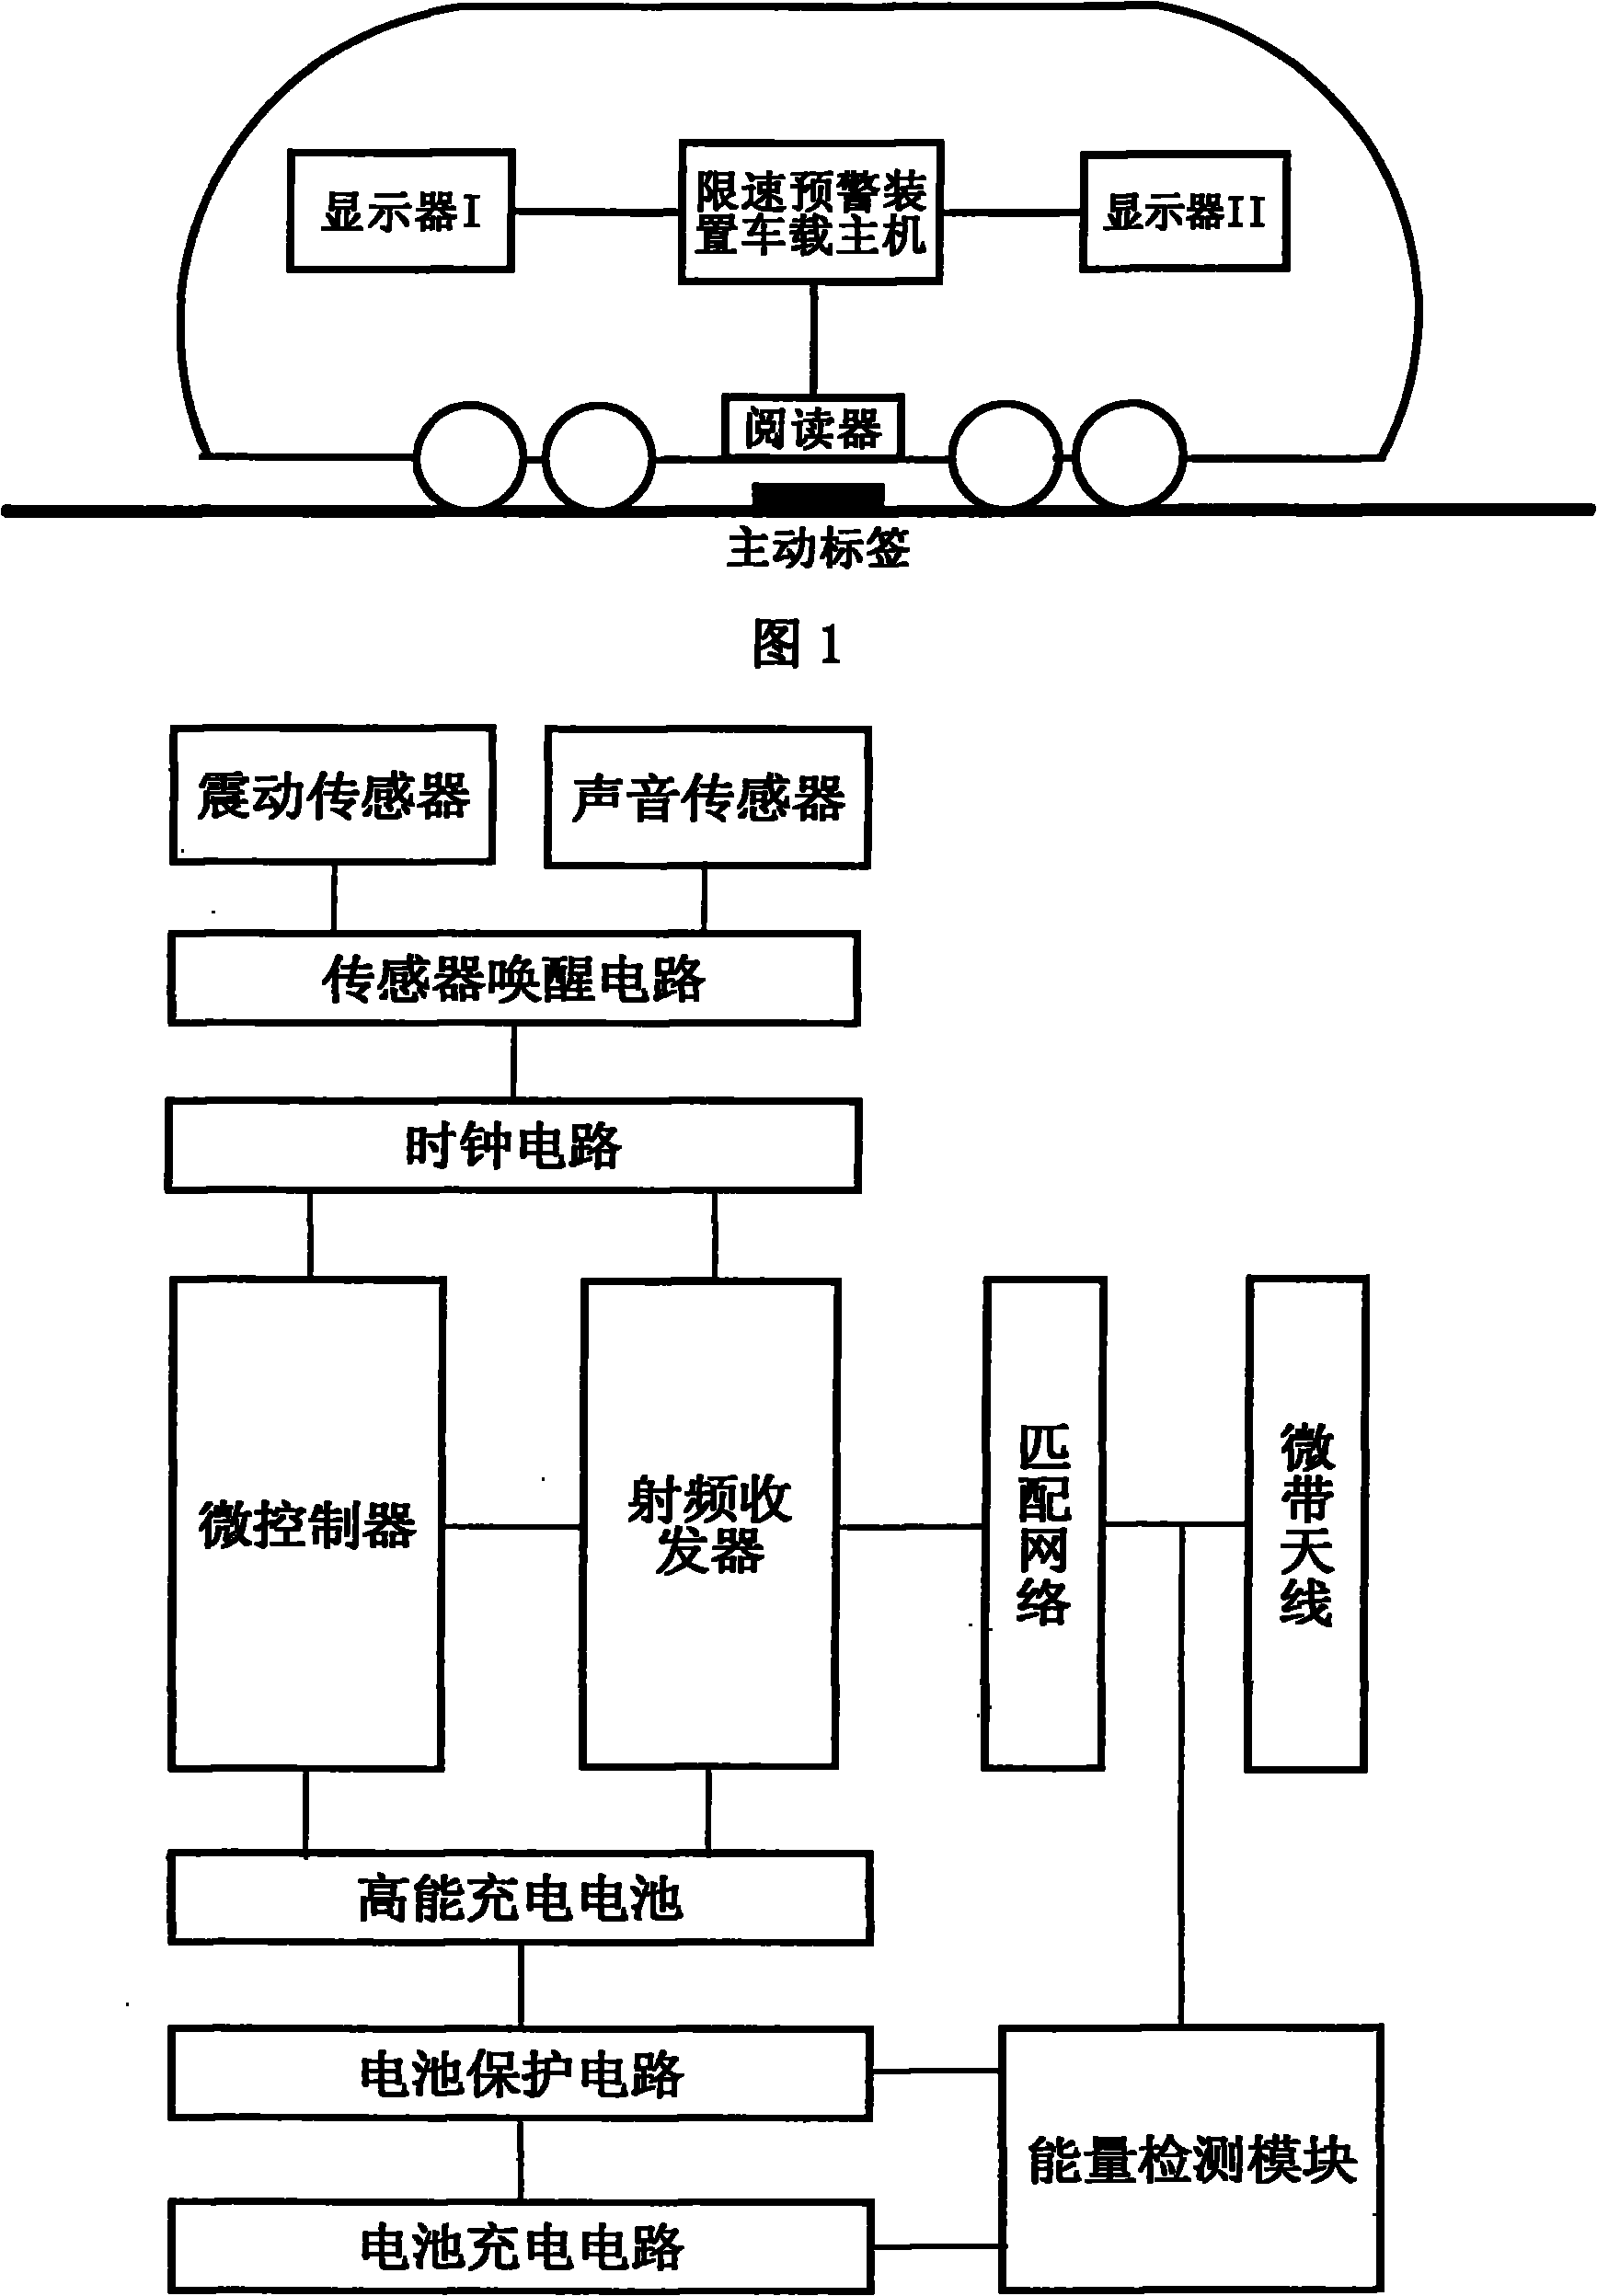 Active temporary speed-limit tag and signal processing method thereof